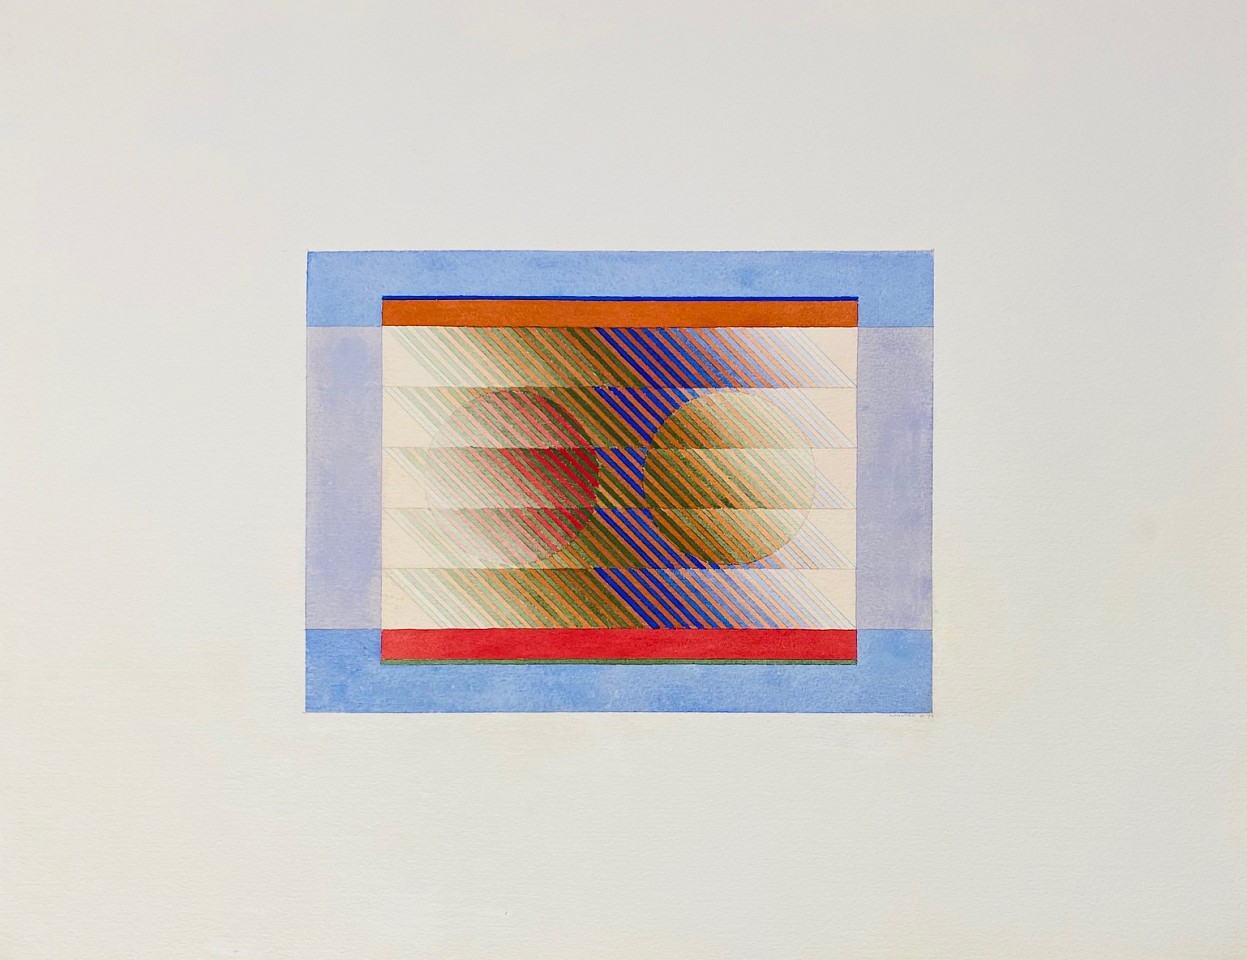 Sewell Sillman, 2 Orbs with Red & Blue
watercolor and pencil on paper, SS: 16"" x 21""   IS: 7 5/8"" x 10 1/4""
JCA 6395
$3,000